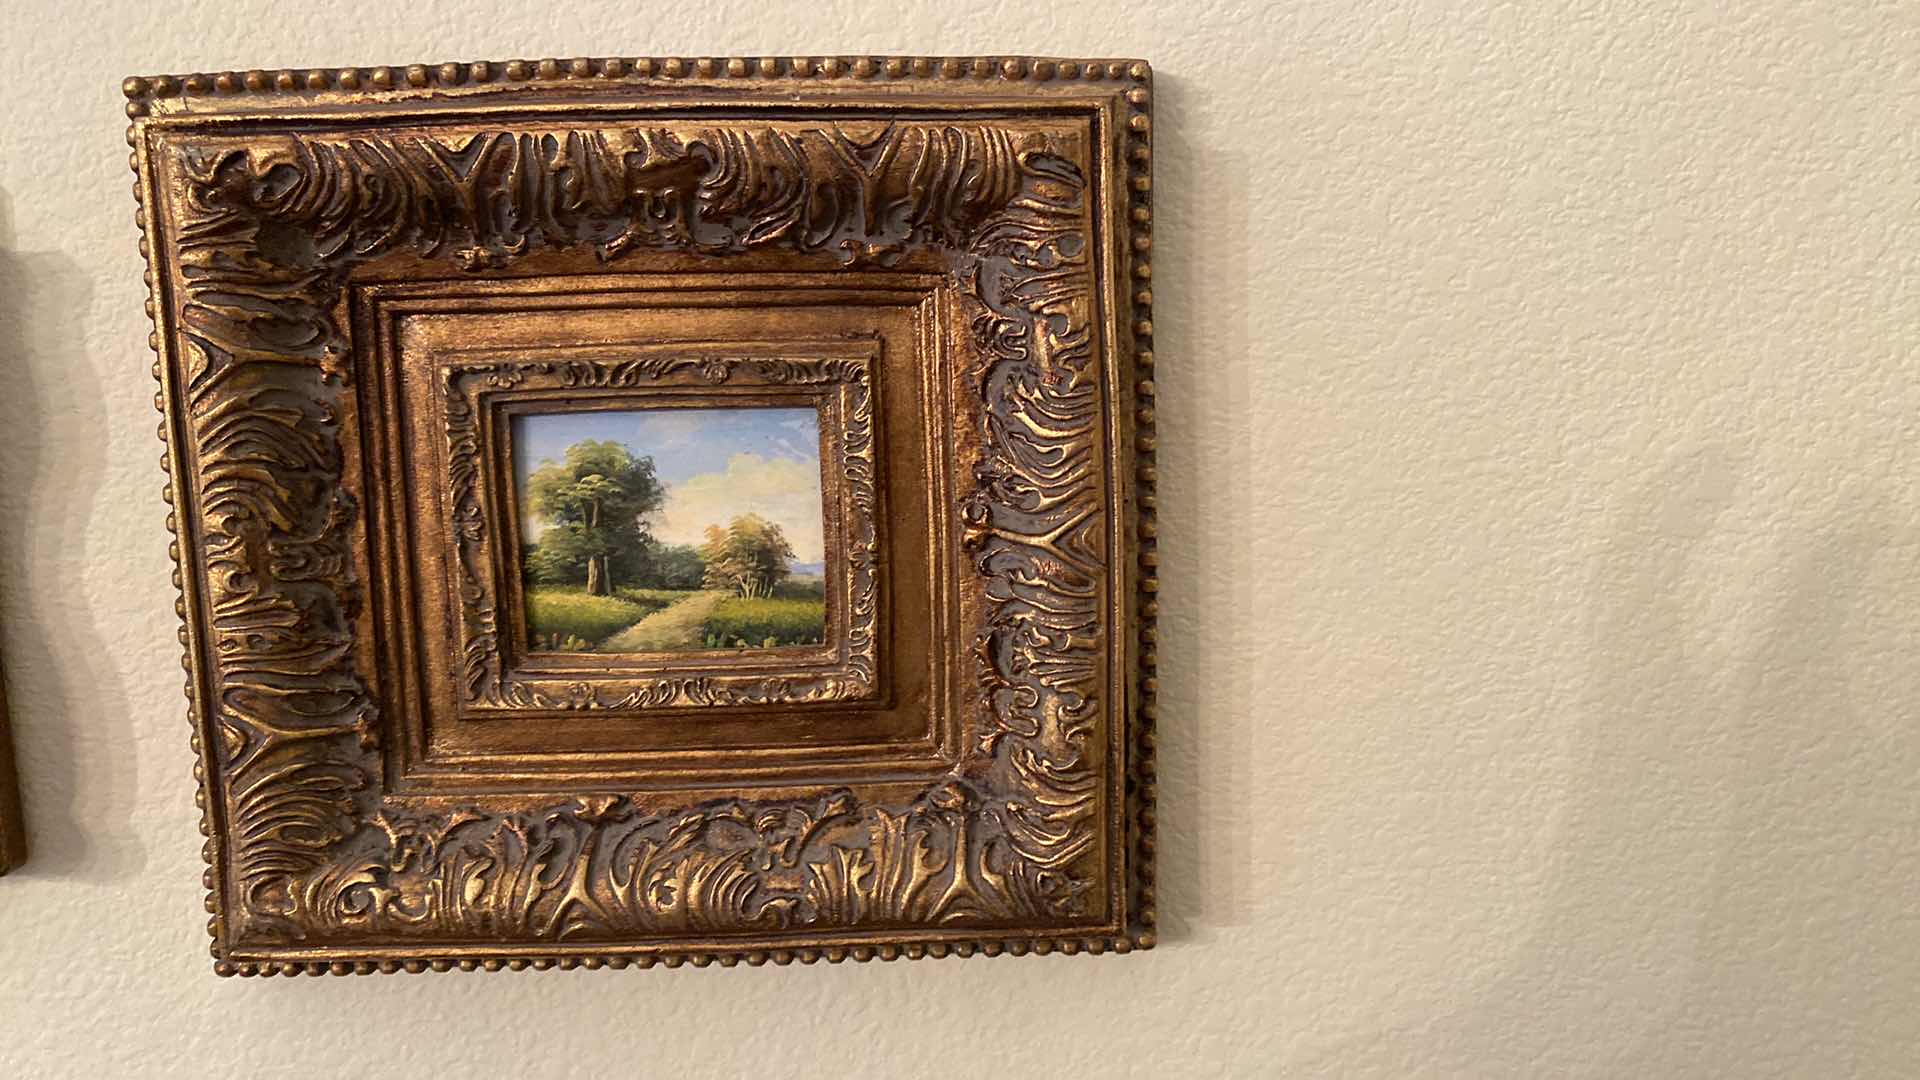 Photo 5 of 4-ORNATE GOLD FRAMED PAINTINGS LARGEST 10“ x 9“